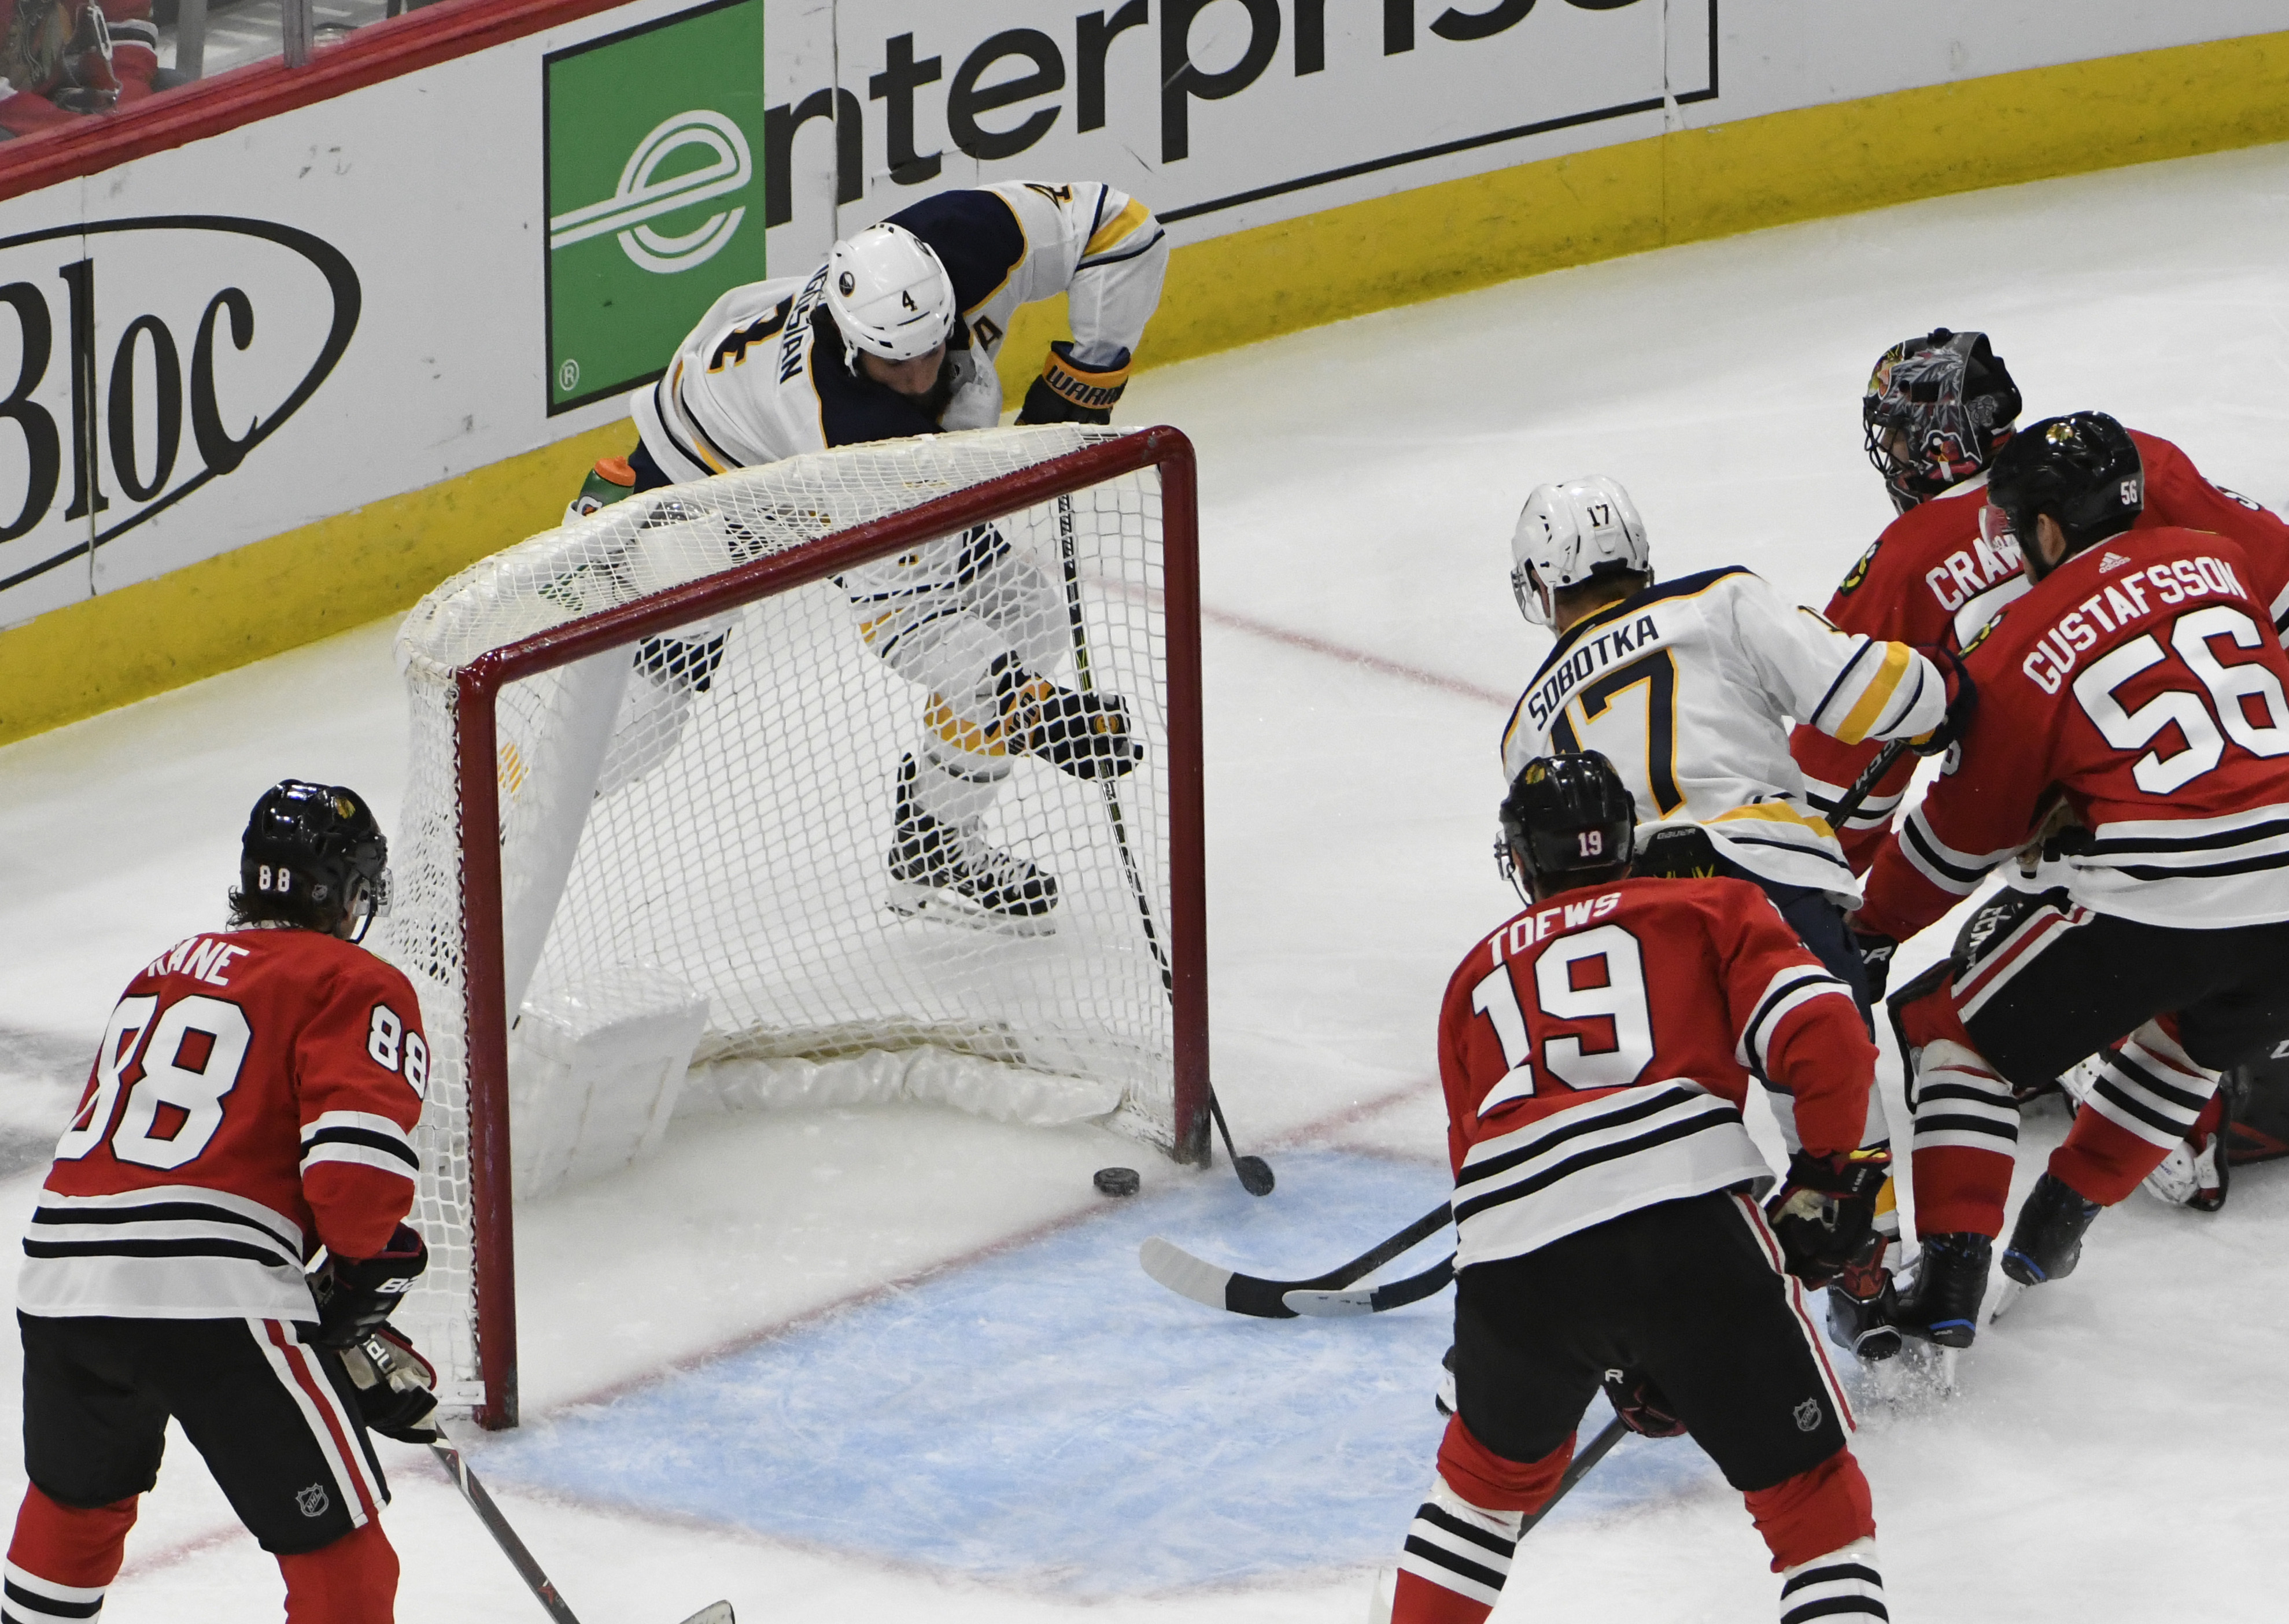 Blackhawks rally for 5-4 shootout win over Sabres